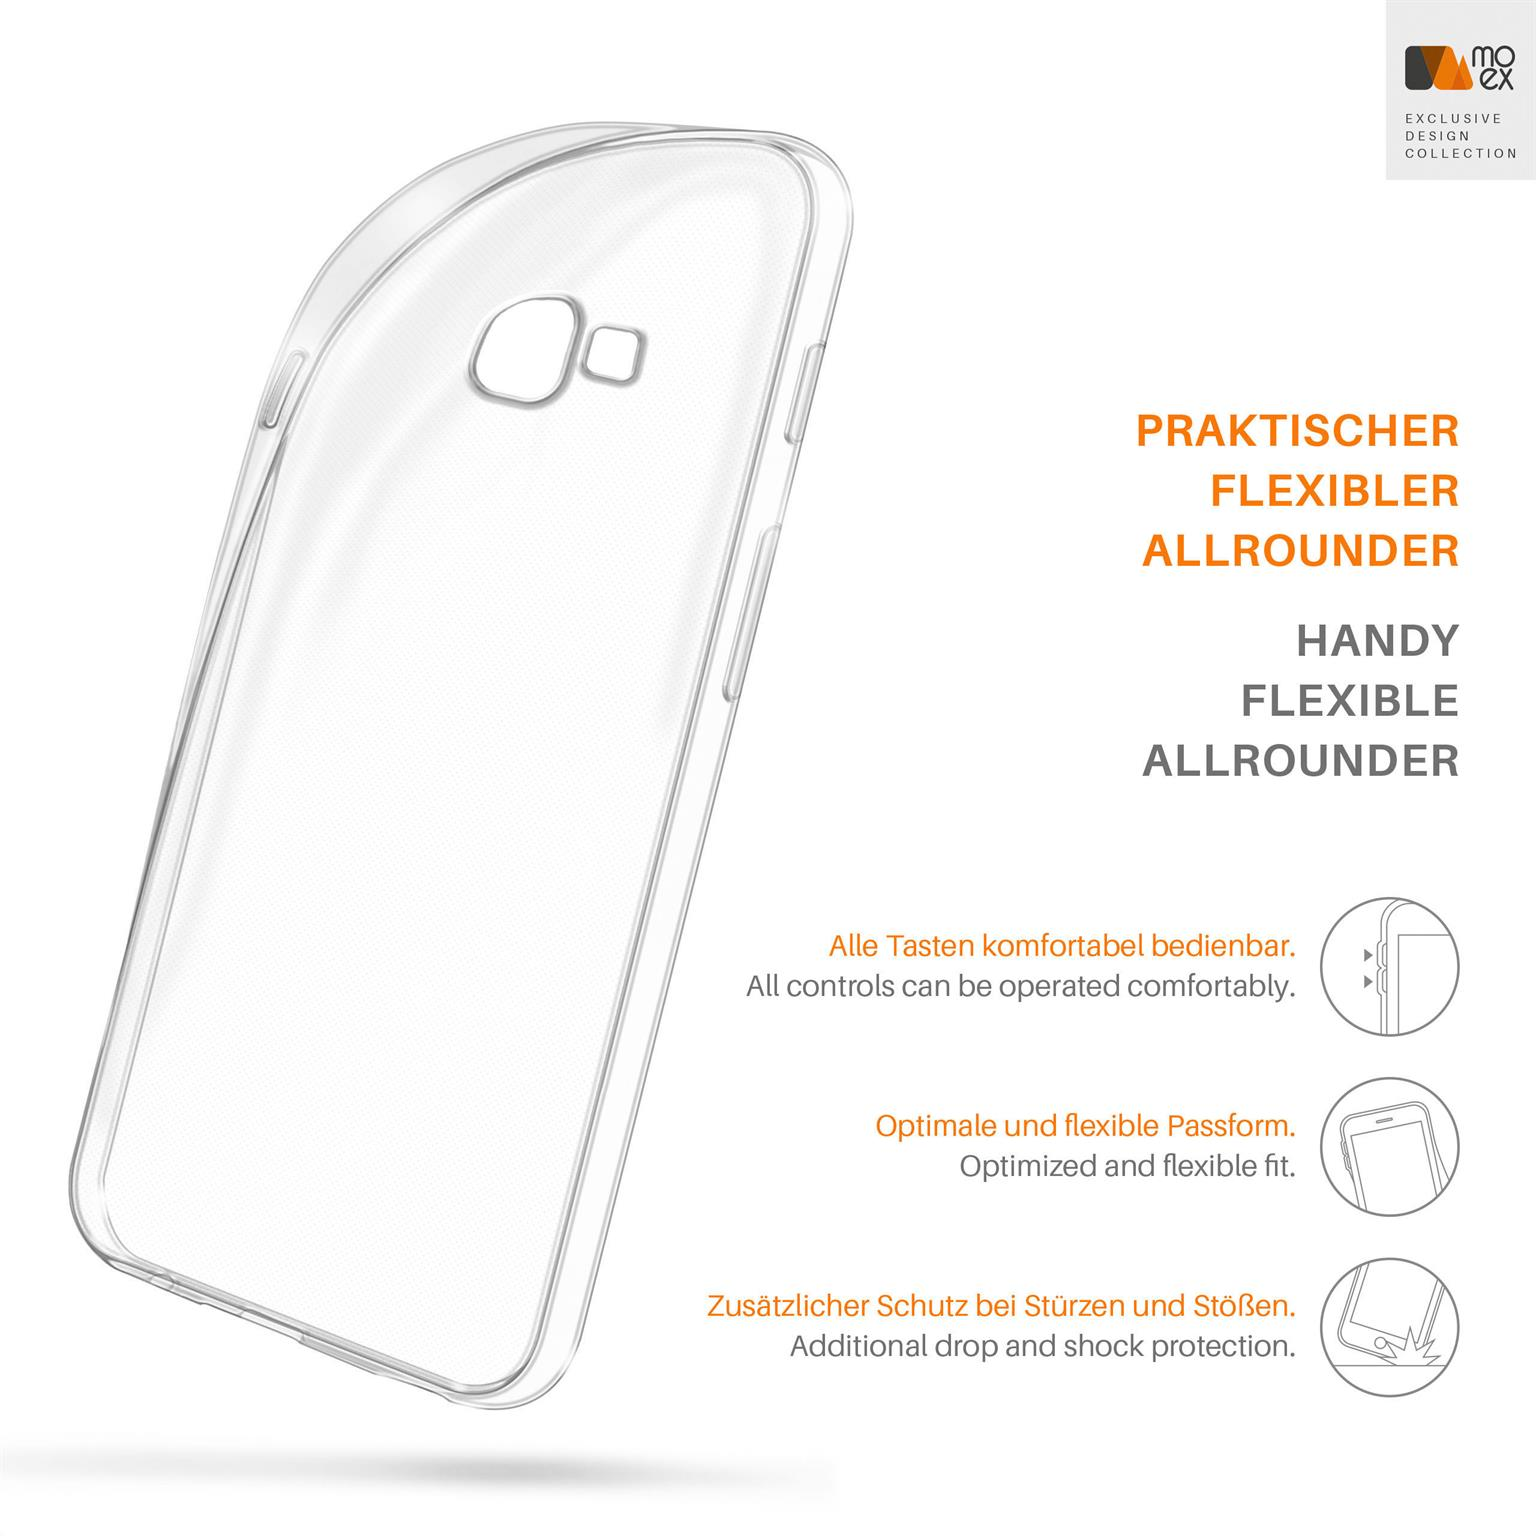 Case, Backcover, Galaxy Aero MOEX 4s, Crystal-Clear Xcover Samsung,